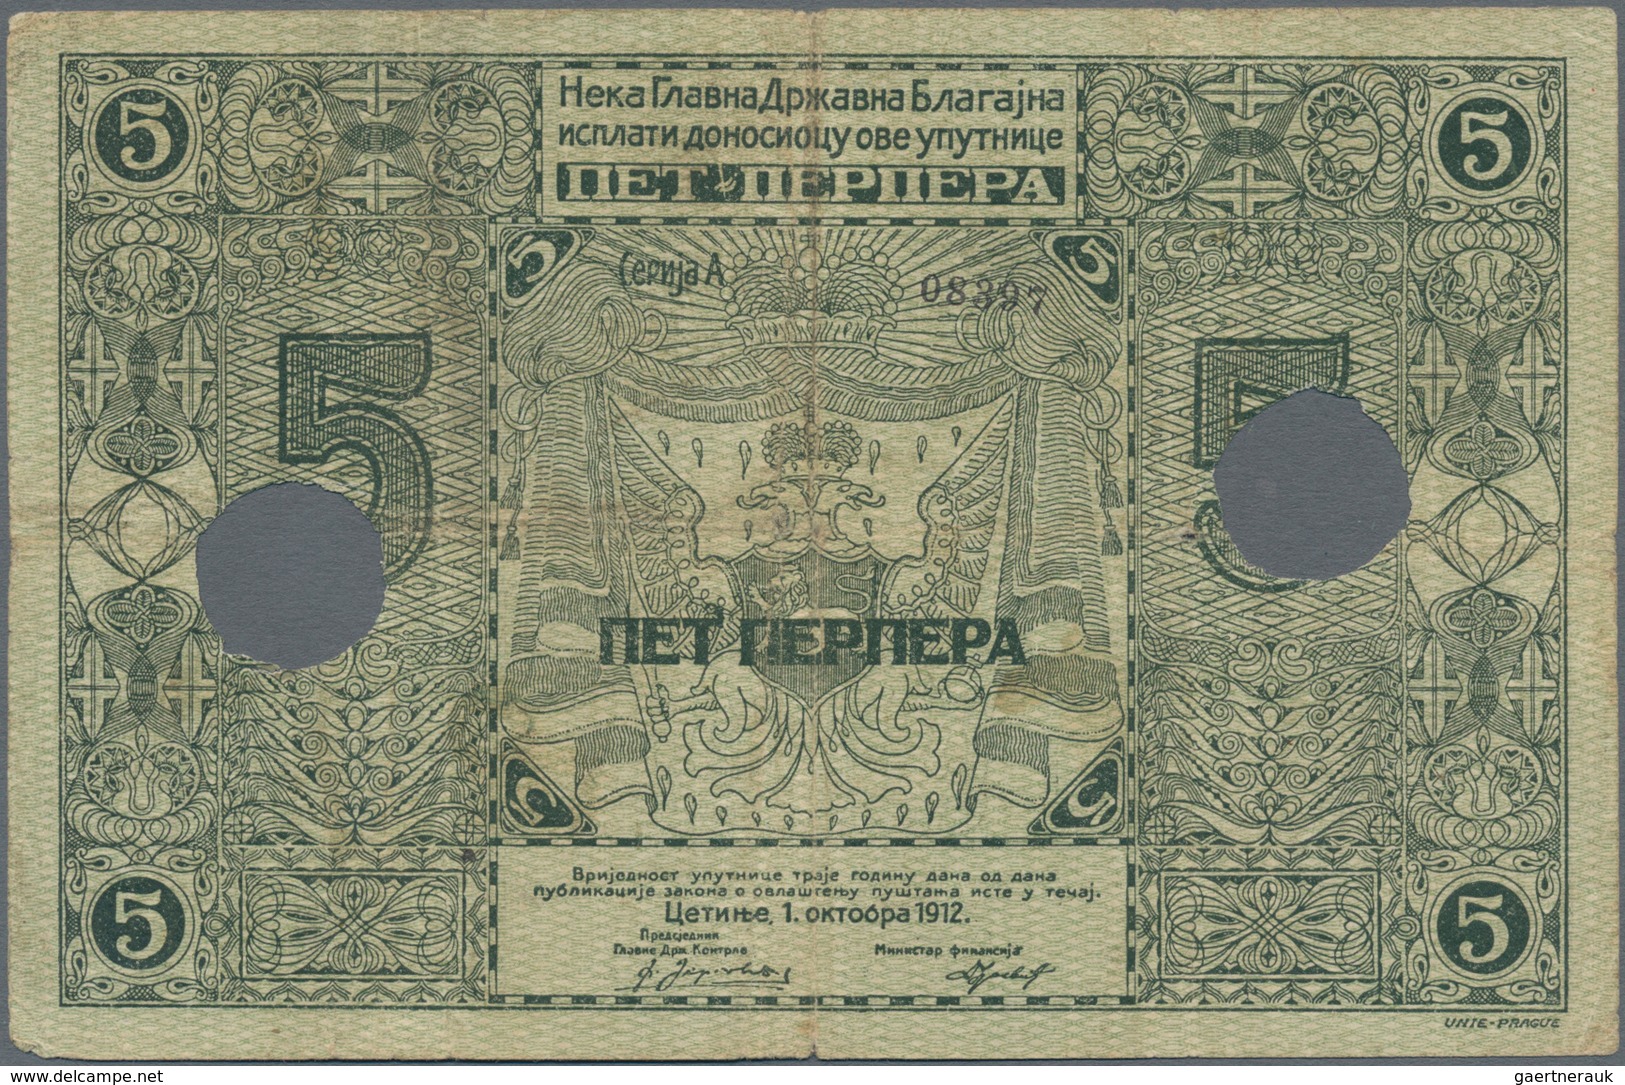 Montenegro: Ministry of Finance, set with 5 banknotes of the 1912 issue with 1 Perper P.1 (F- with 4